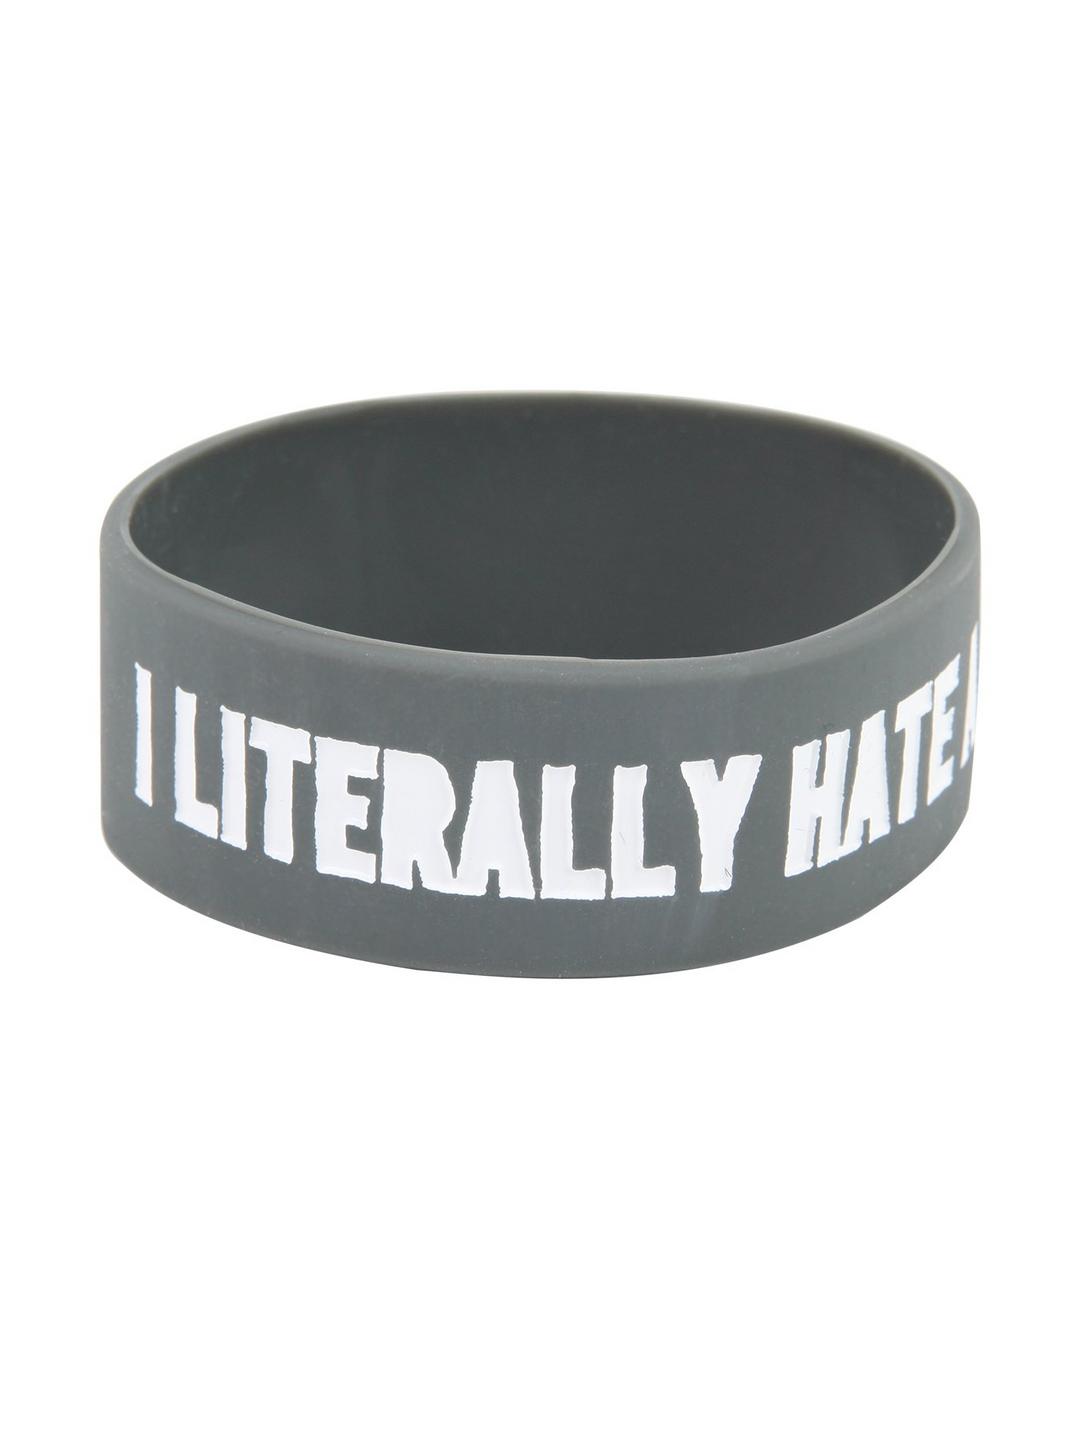 I Literally Hate All Of You Rubber Bracelet, , hi-res